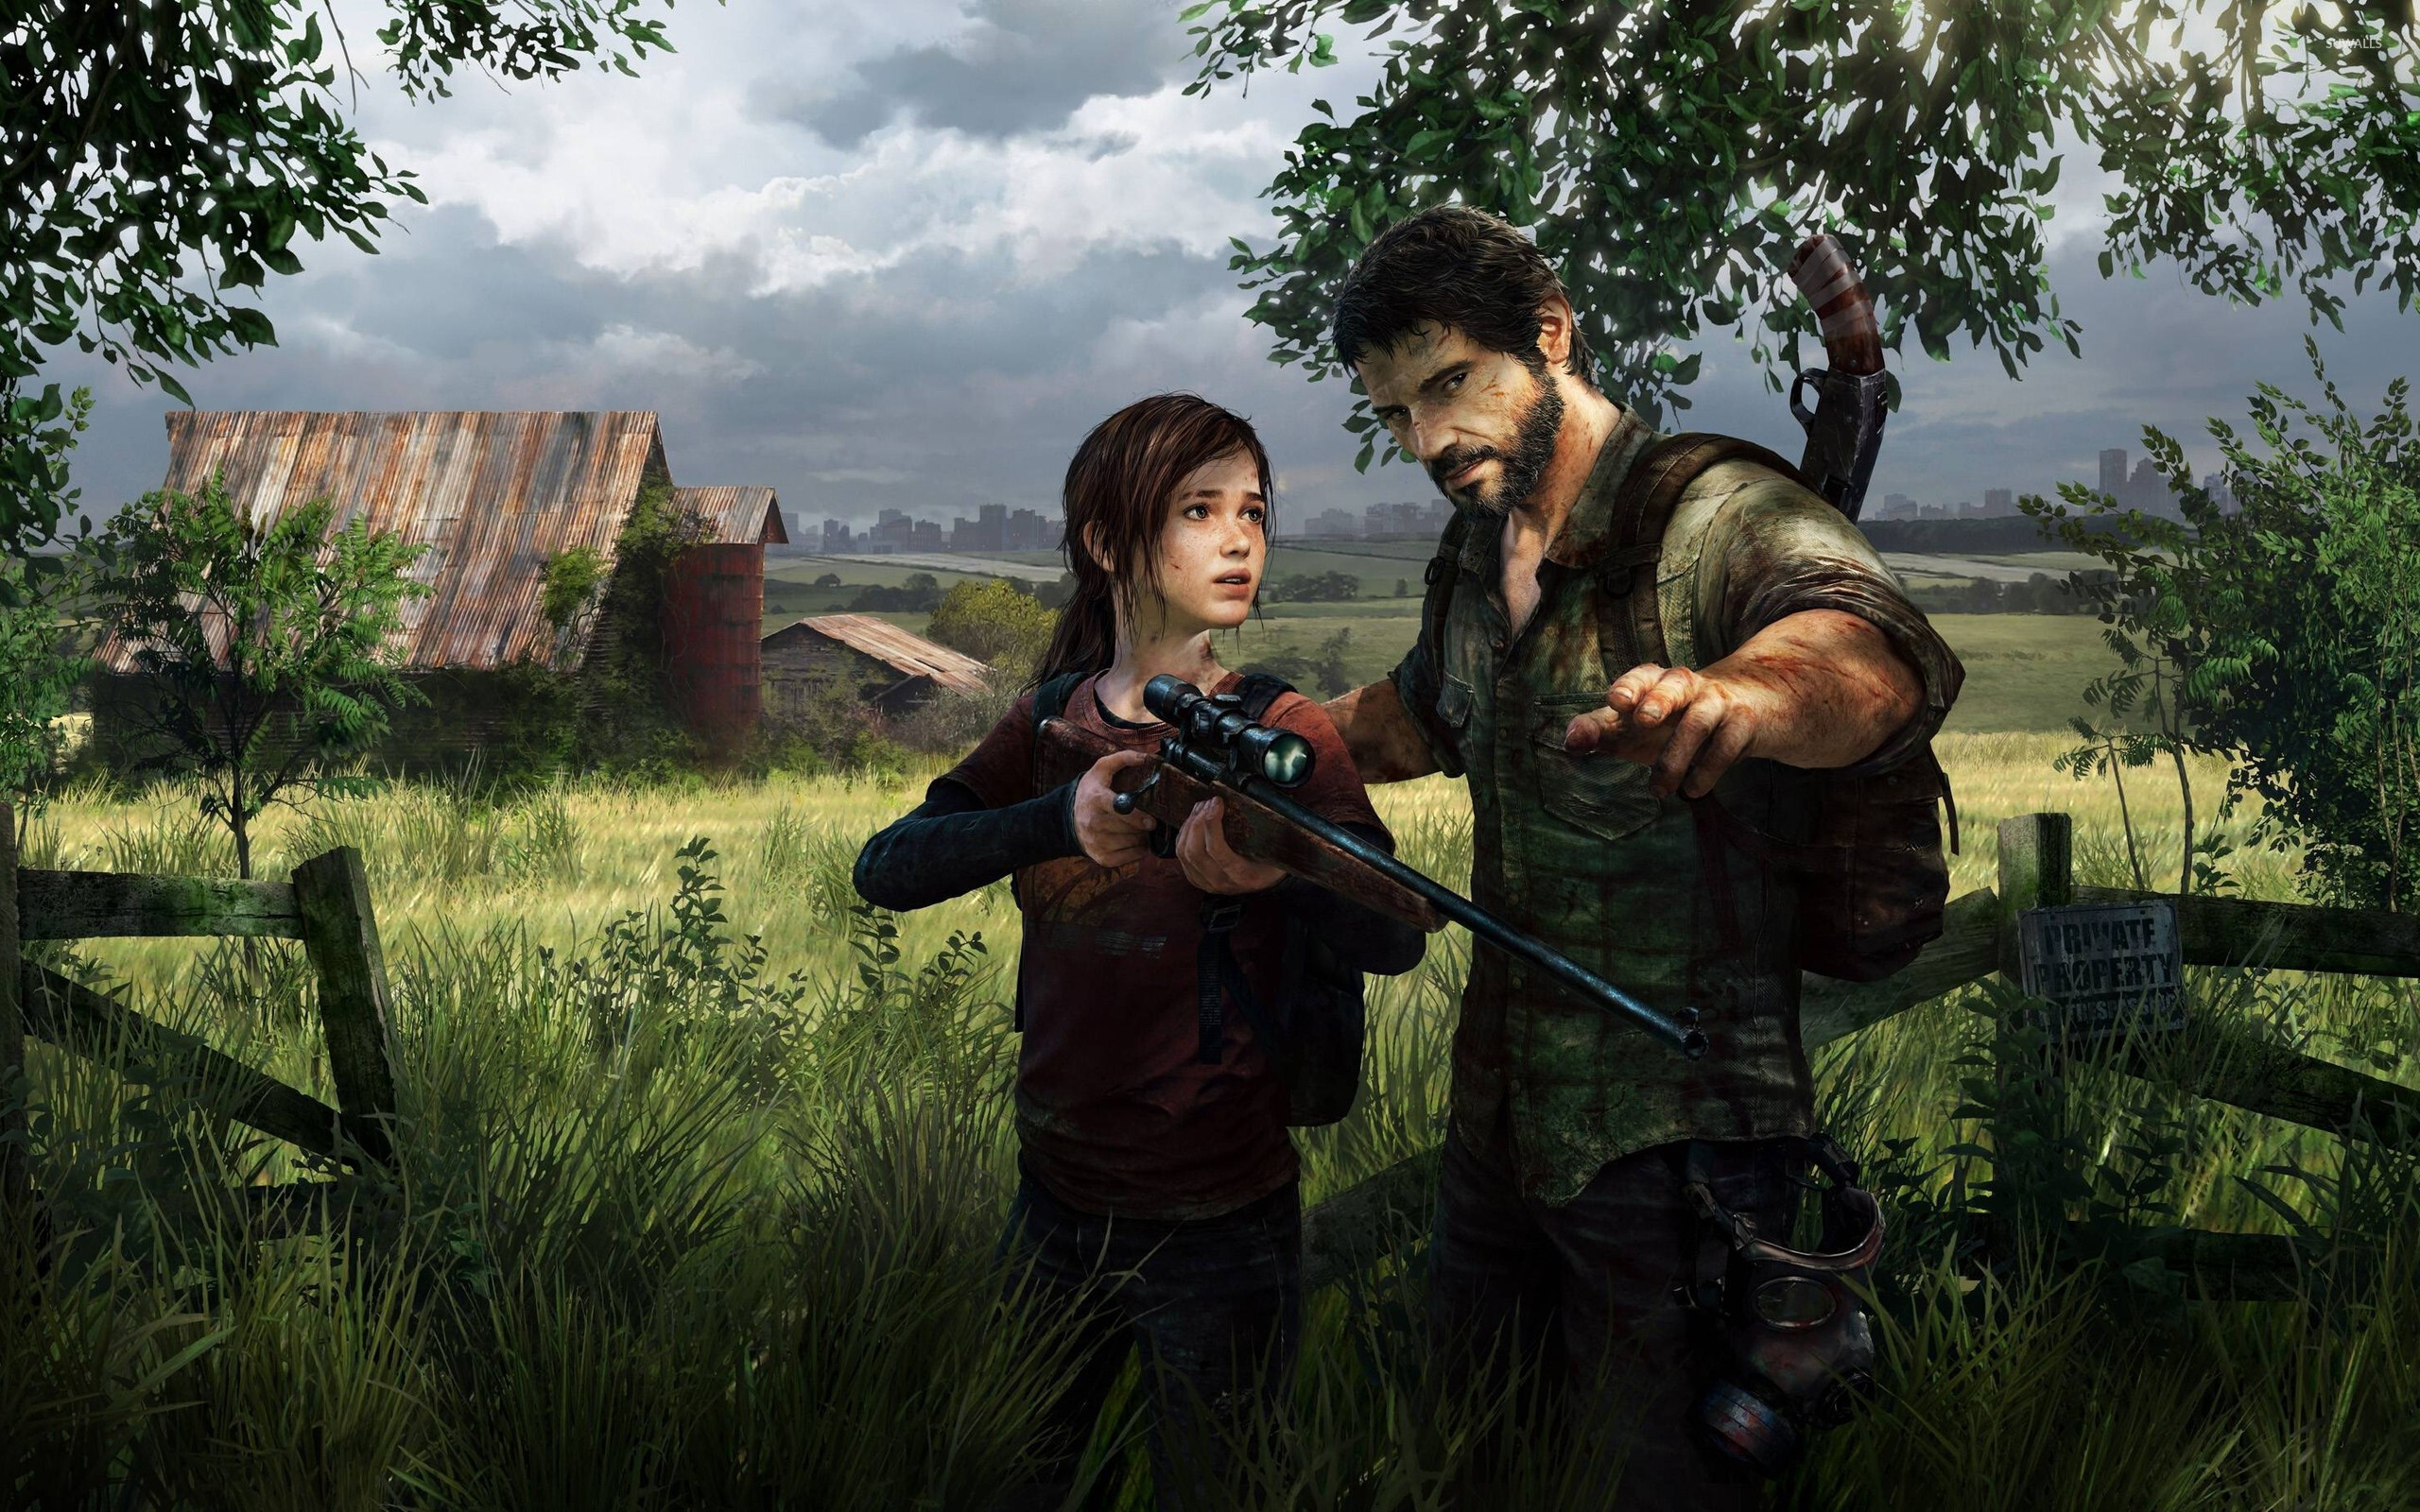 The Last of Us: The player can use firearms, improvised weapons, and stealth to defend against hostile humans and cannibalistic creatures infected by a mutated strain of the Cordyceps fungus. 2560x1600 HD Background.